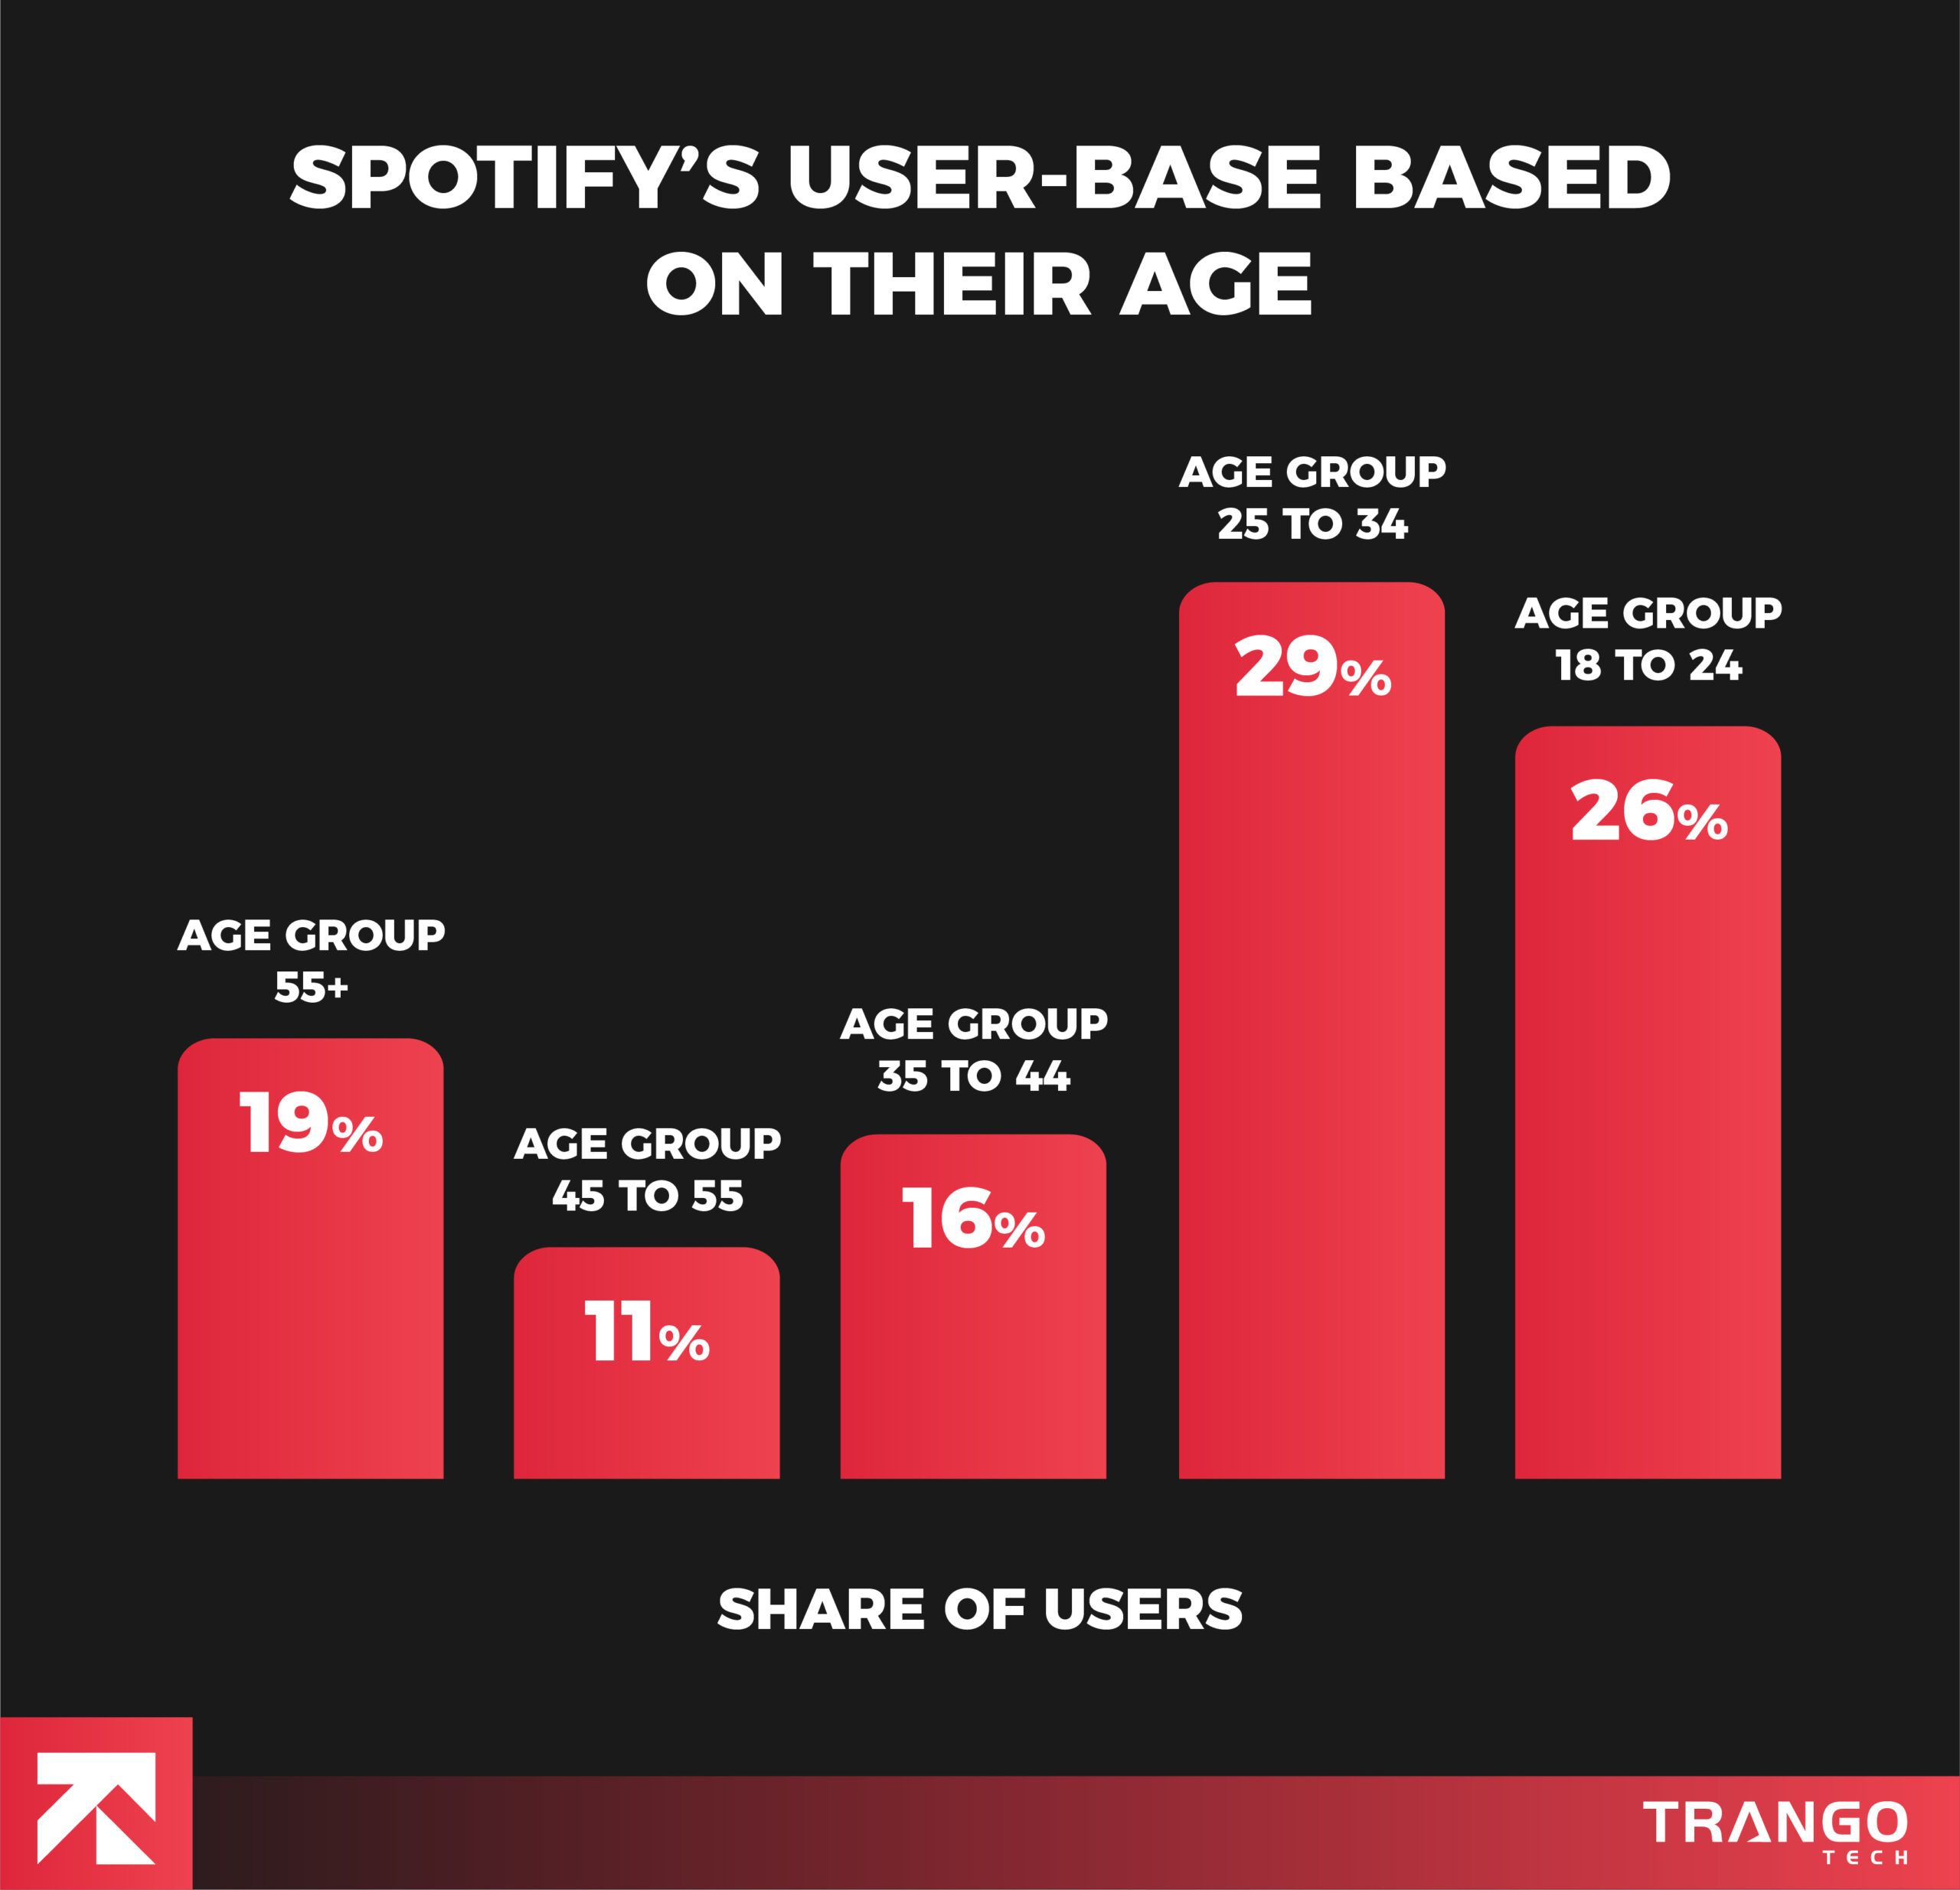 spotify user-base according to their age